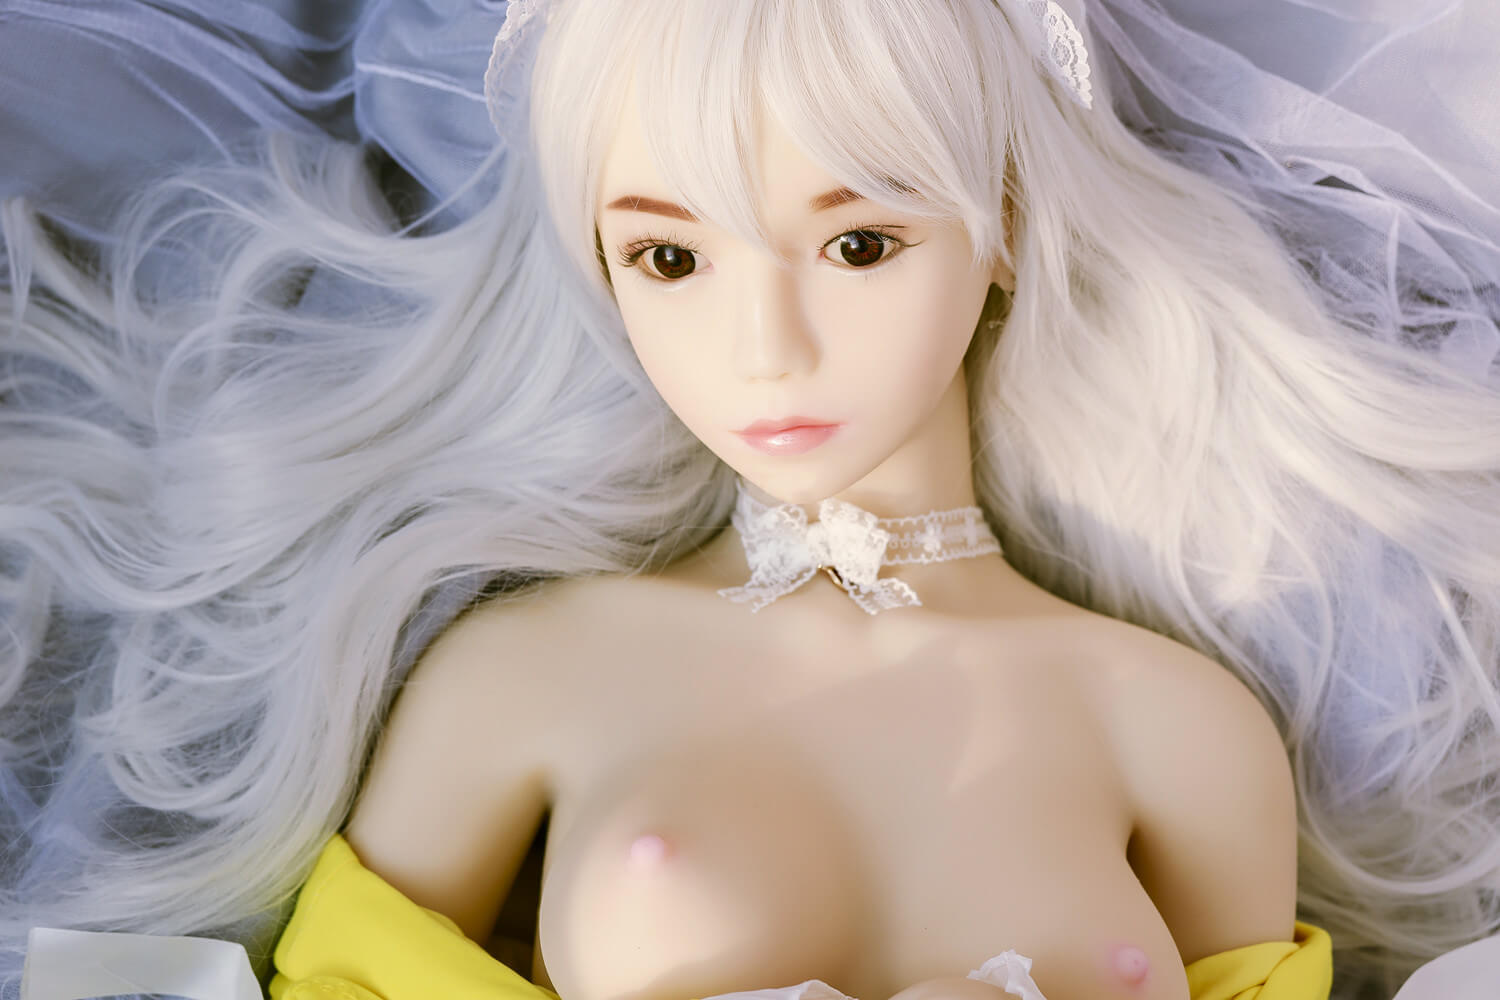 Nancy White Skin Sex Dolls - Real and Cheap Real Doll by SexDollsFun